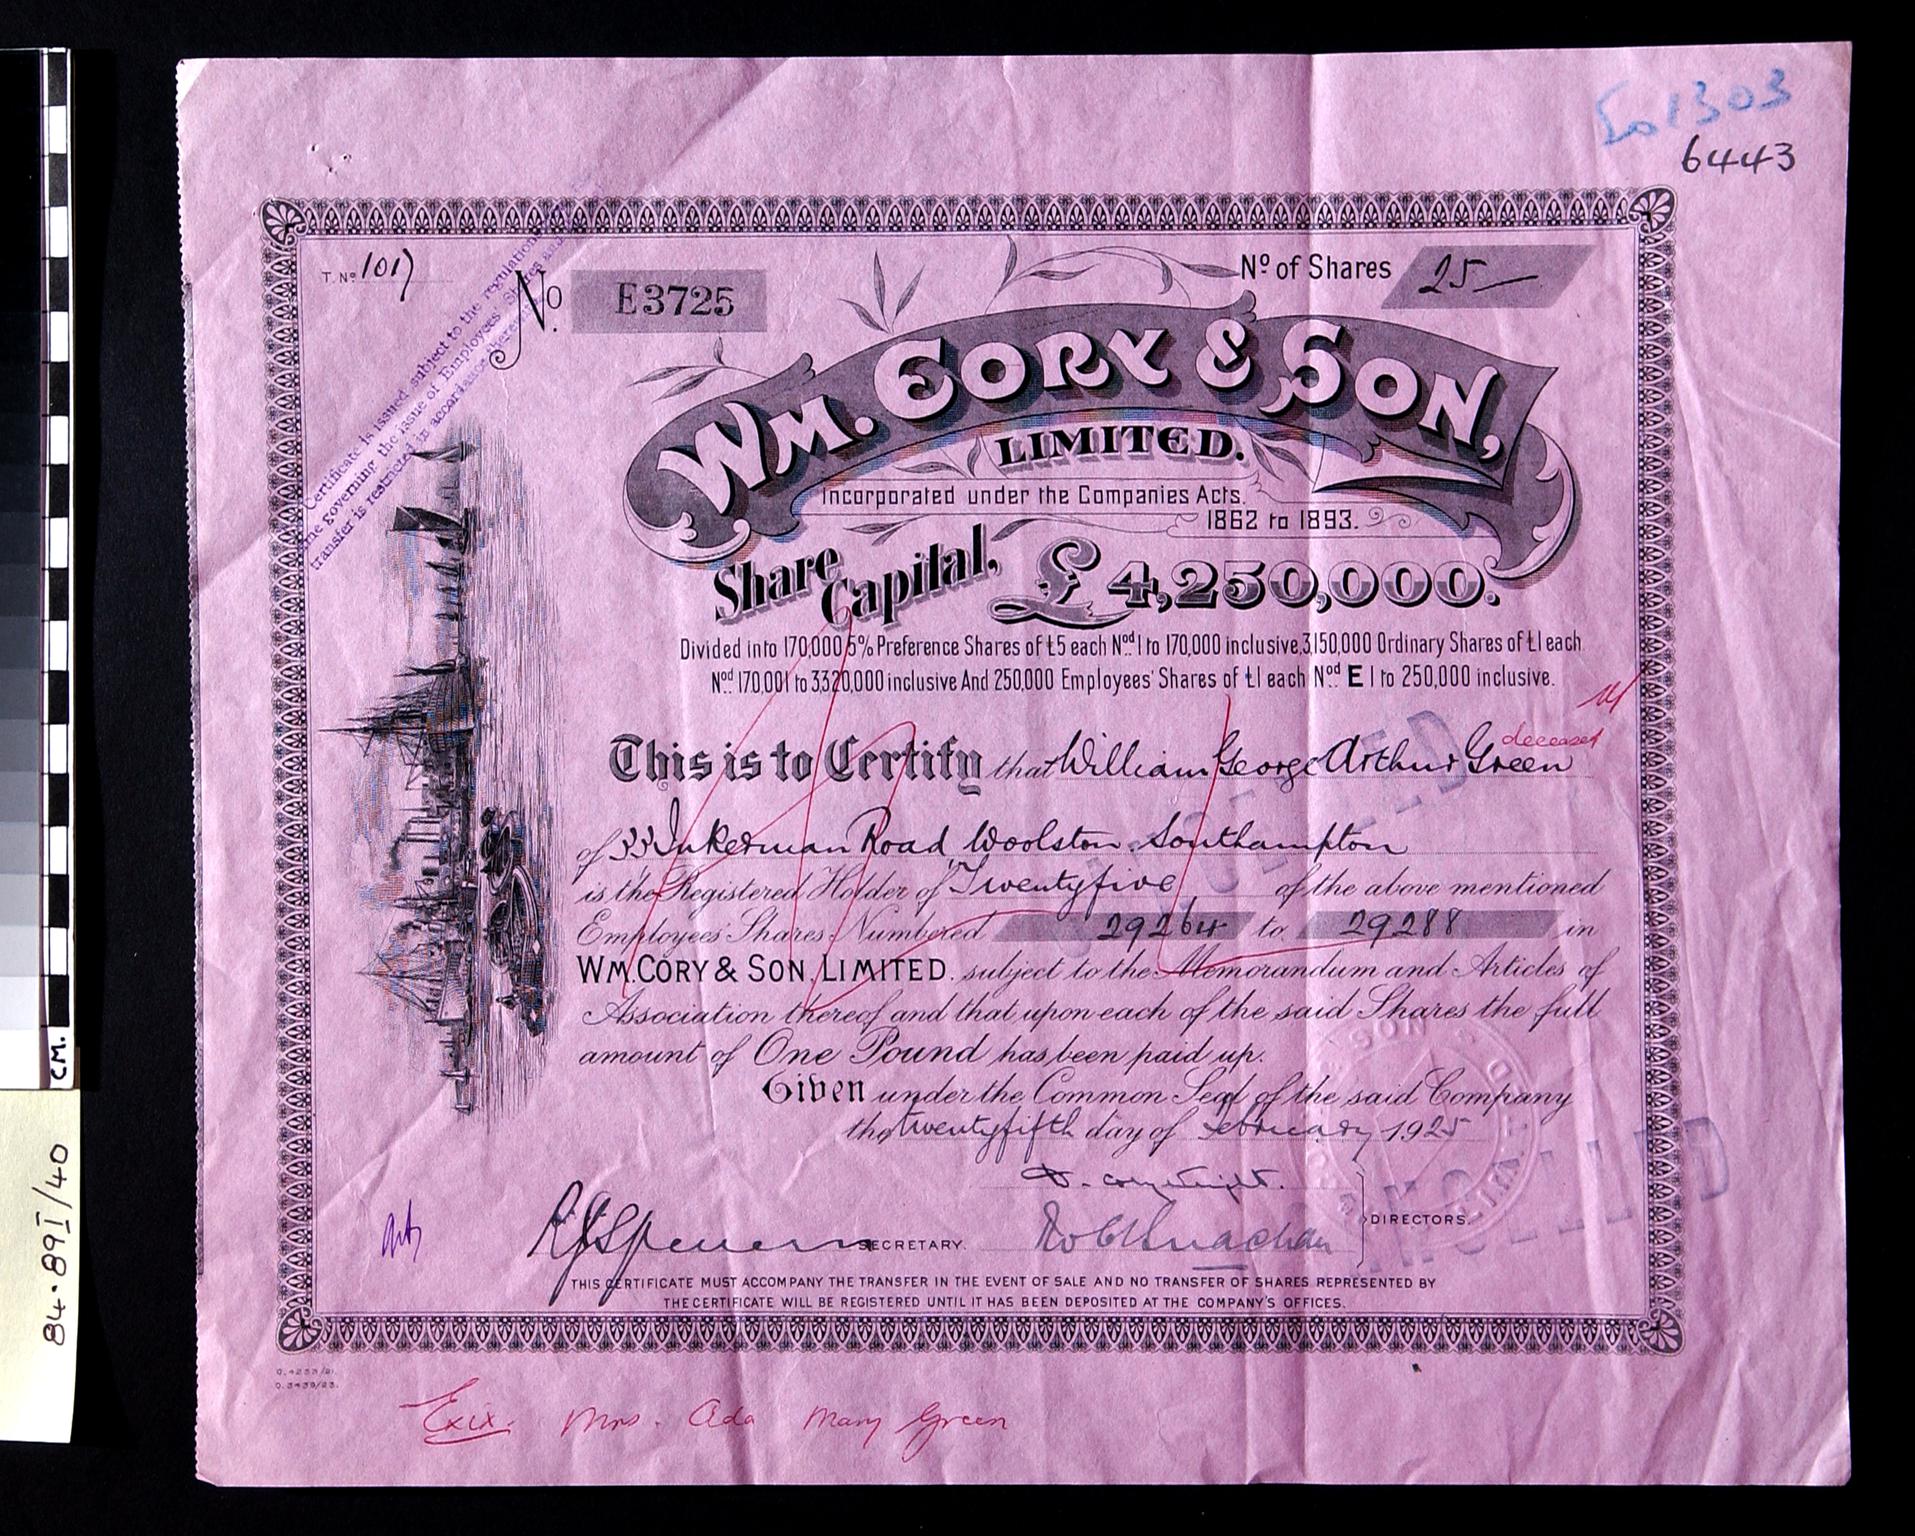 Wm. Cory & Son Limited, share certificate